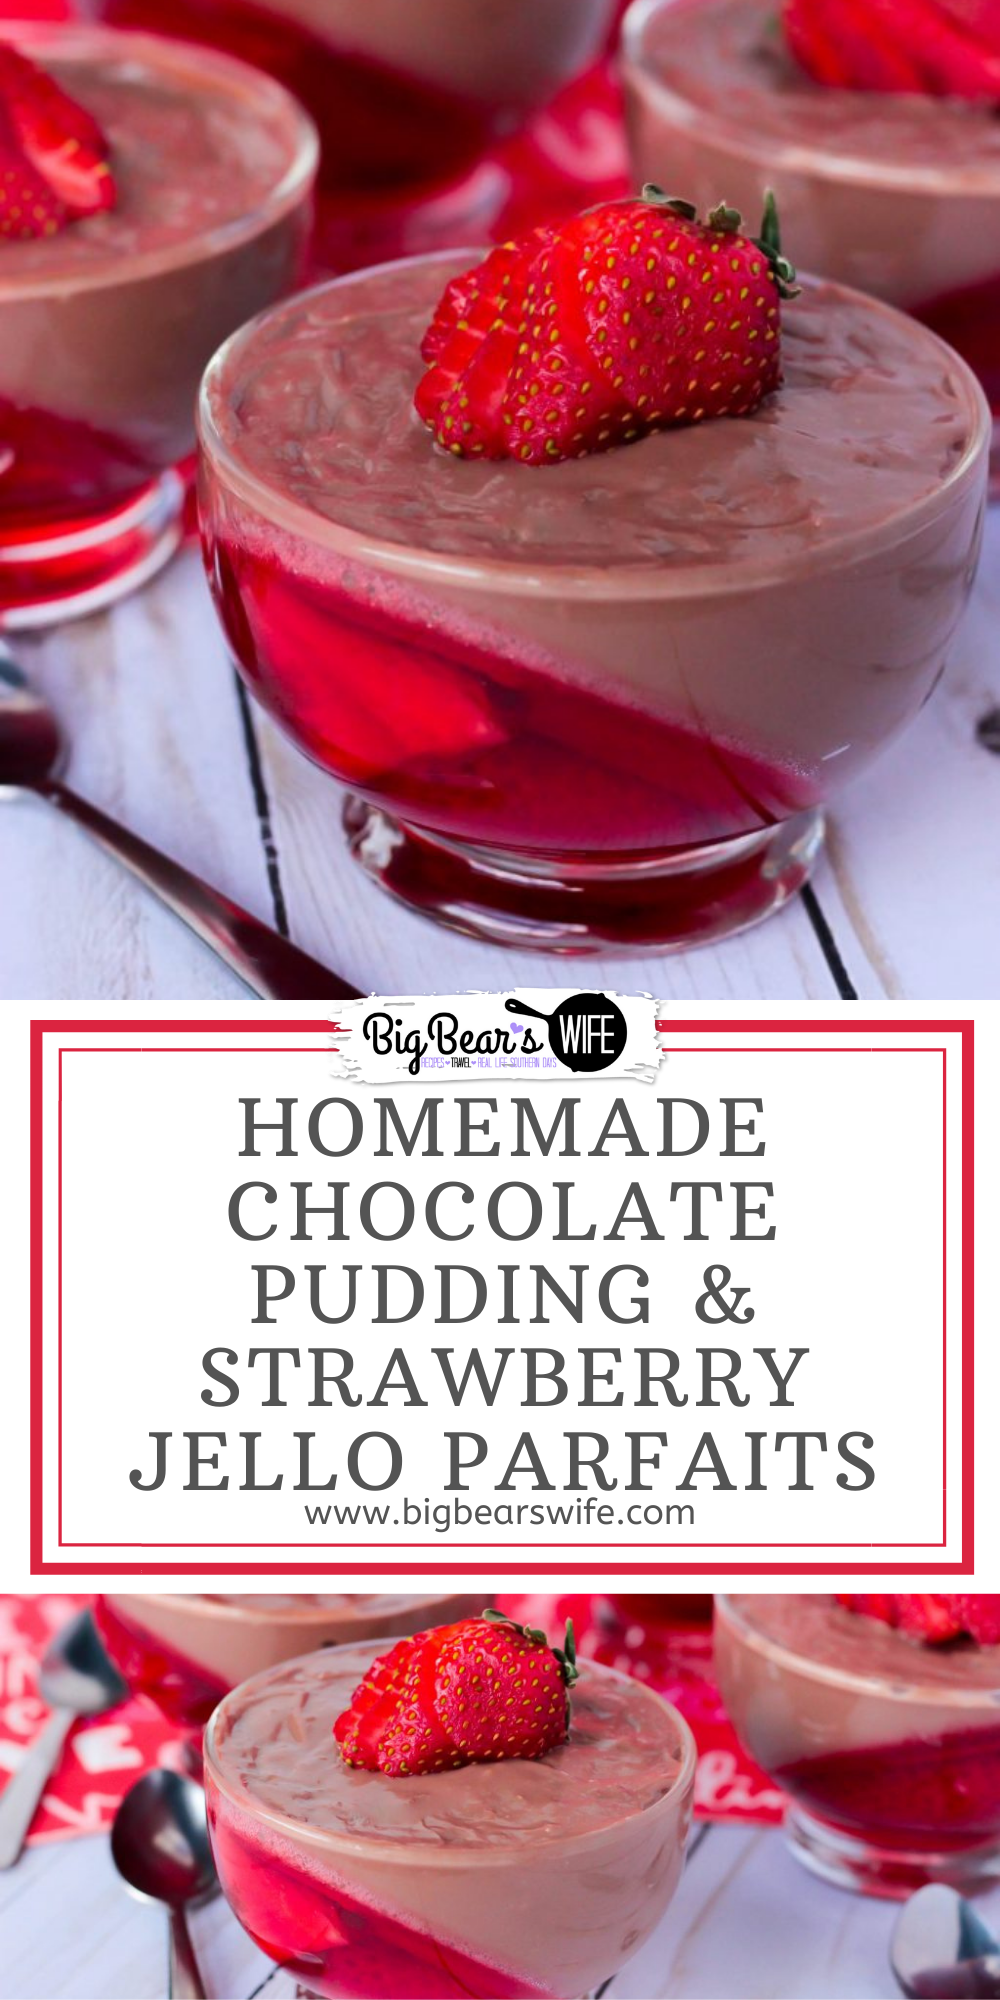  Chocolate Pudding and Strawberry Jello Parfaits are made up of wonderful homemade chocolate pudding on one side of the glass and and strawberry Jello with fresh strawberry slices on the other. This easy dessert recipe is perfect for chefs of all ages. Impress your family and friend with this beautiful sweet treat that can be created by anyone! via @bigbearswife